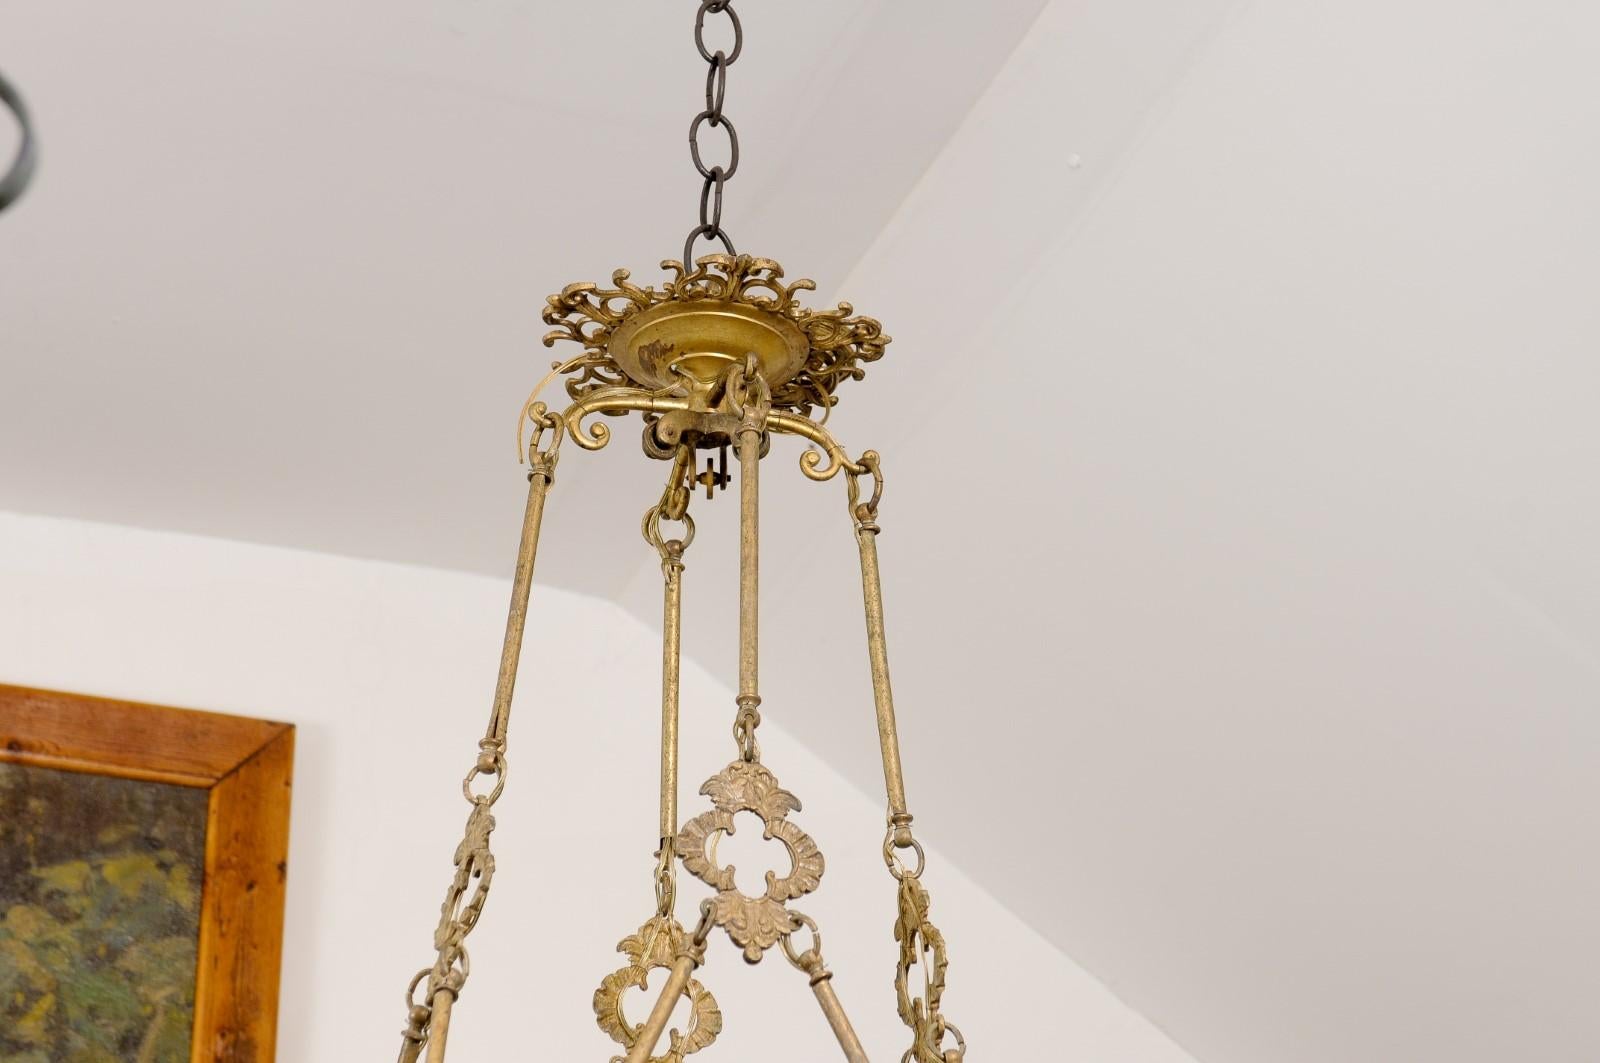 French 19th Century Bronze Twelve Light Ring Chandelier with Scrolling Arms For Sale 2